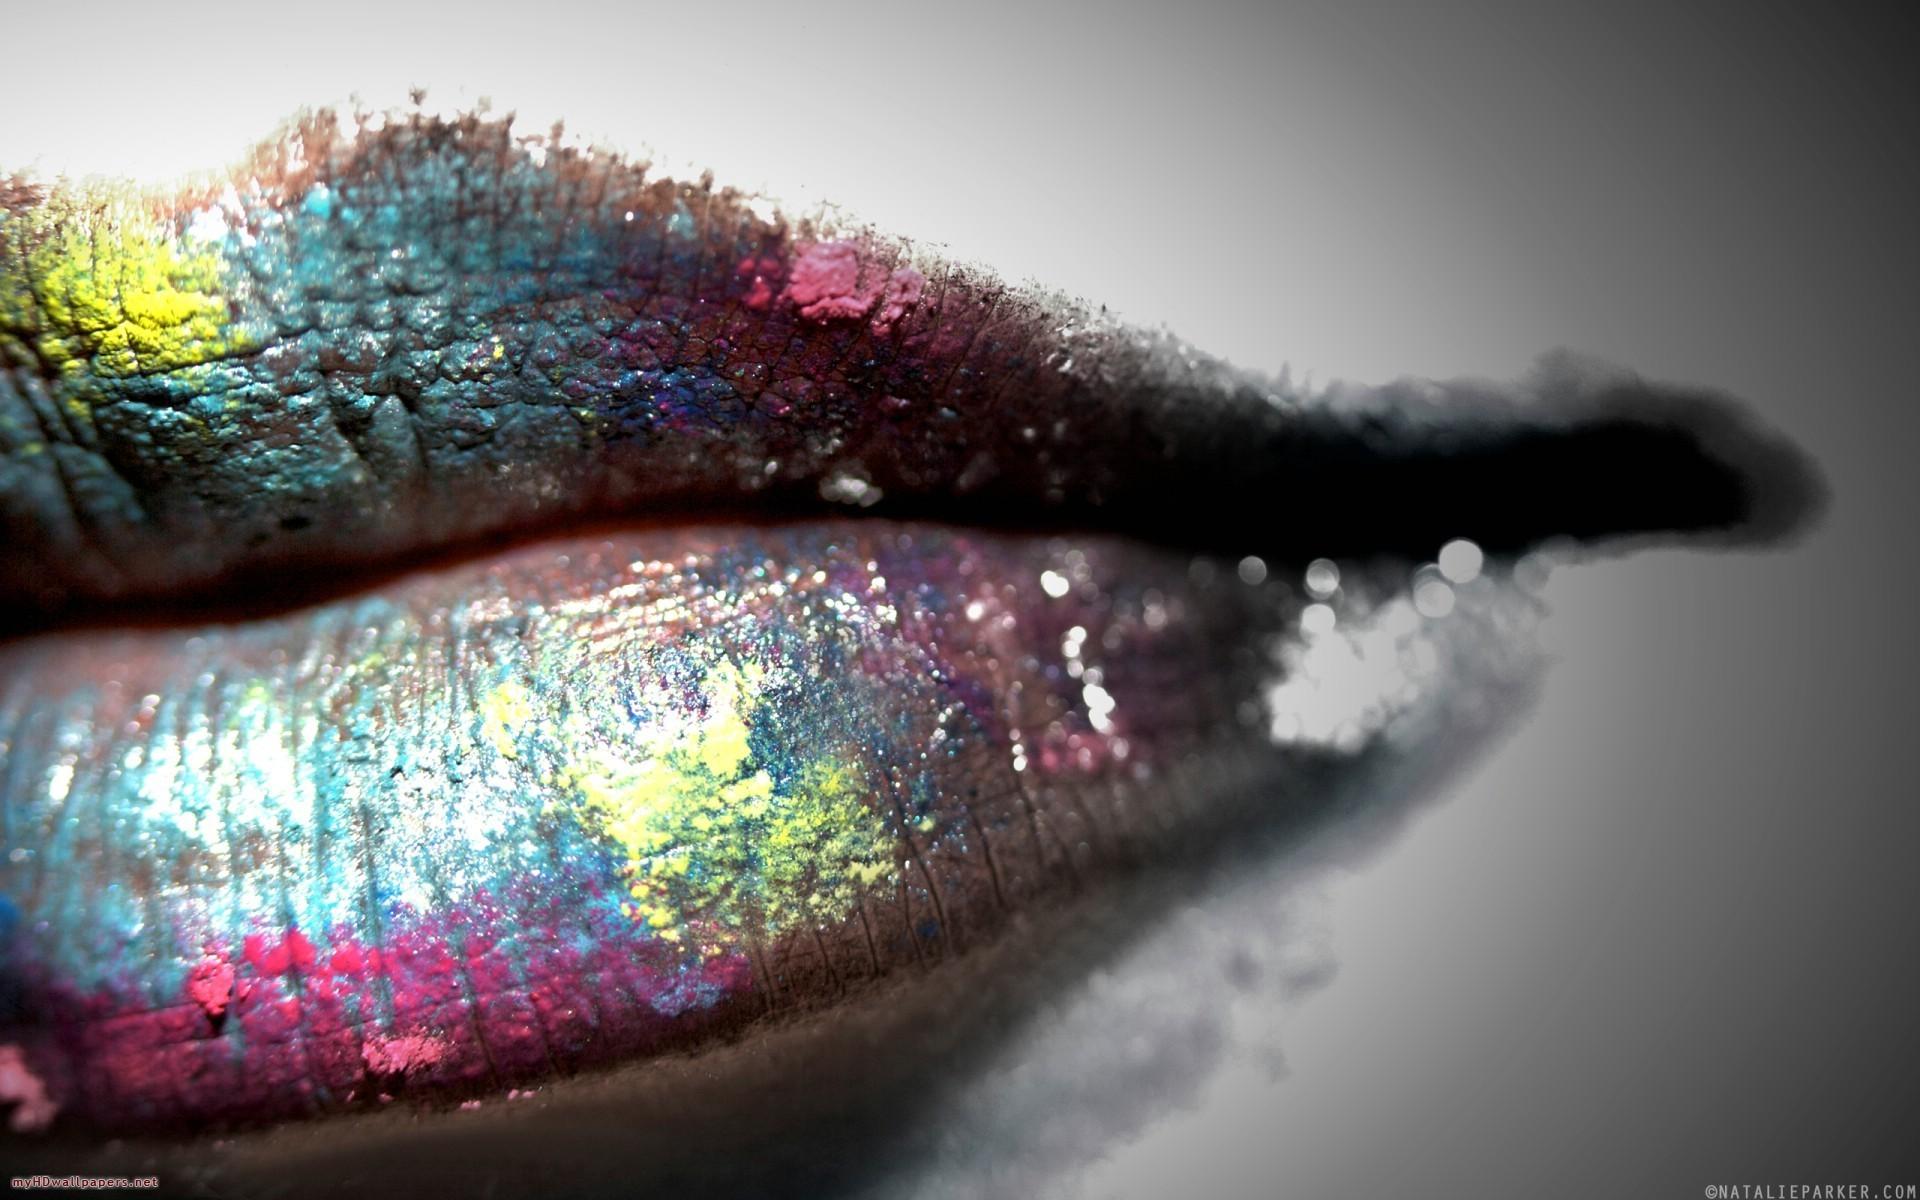 Painted lips wallpaper. PC